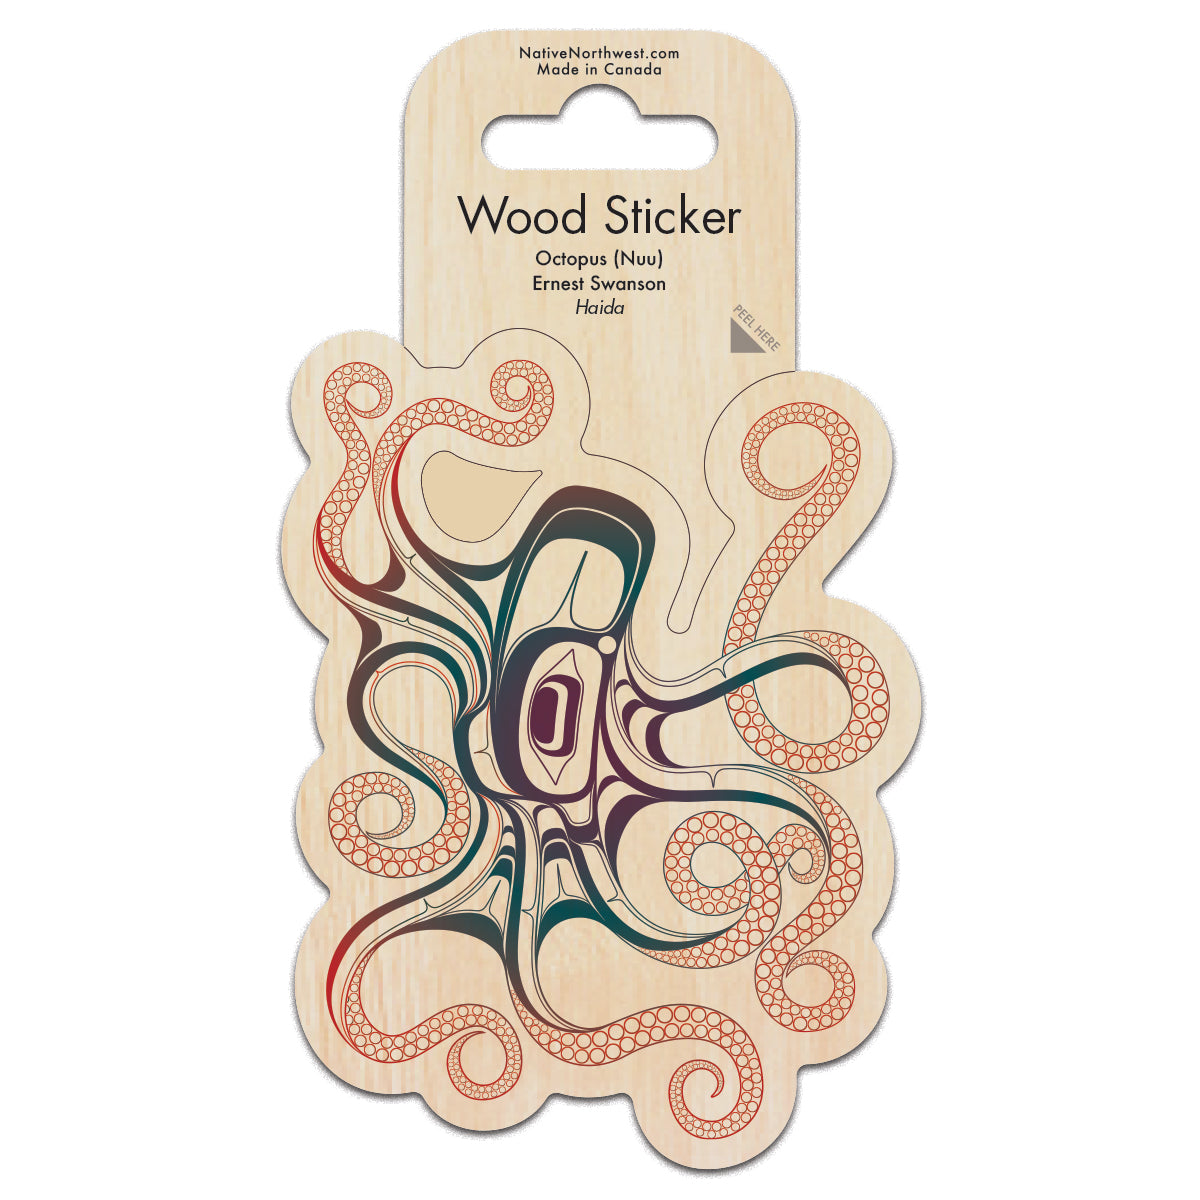 Wood Sticker Octopus - Wood Sticker Octopus -  - House of Himwitsa Native Art Gallery and Gifts